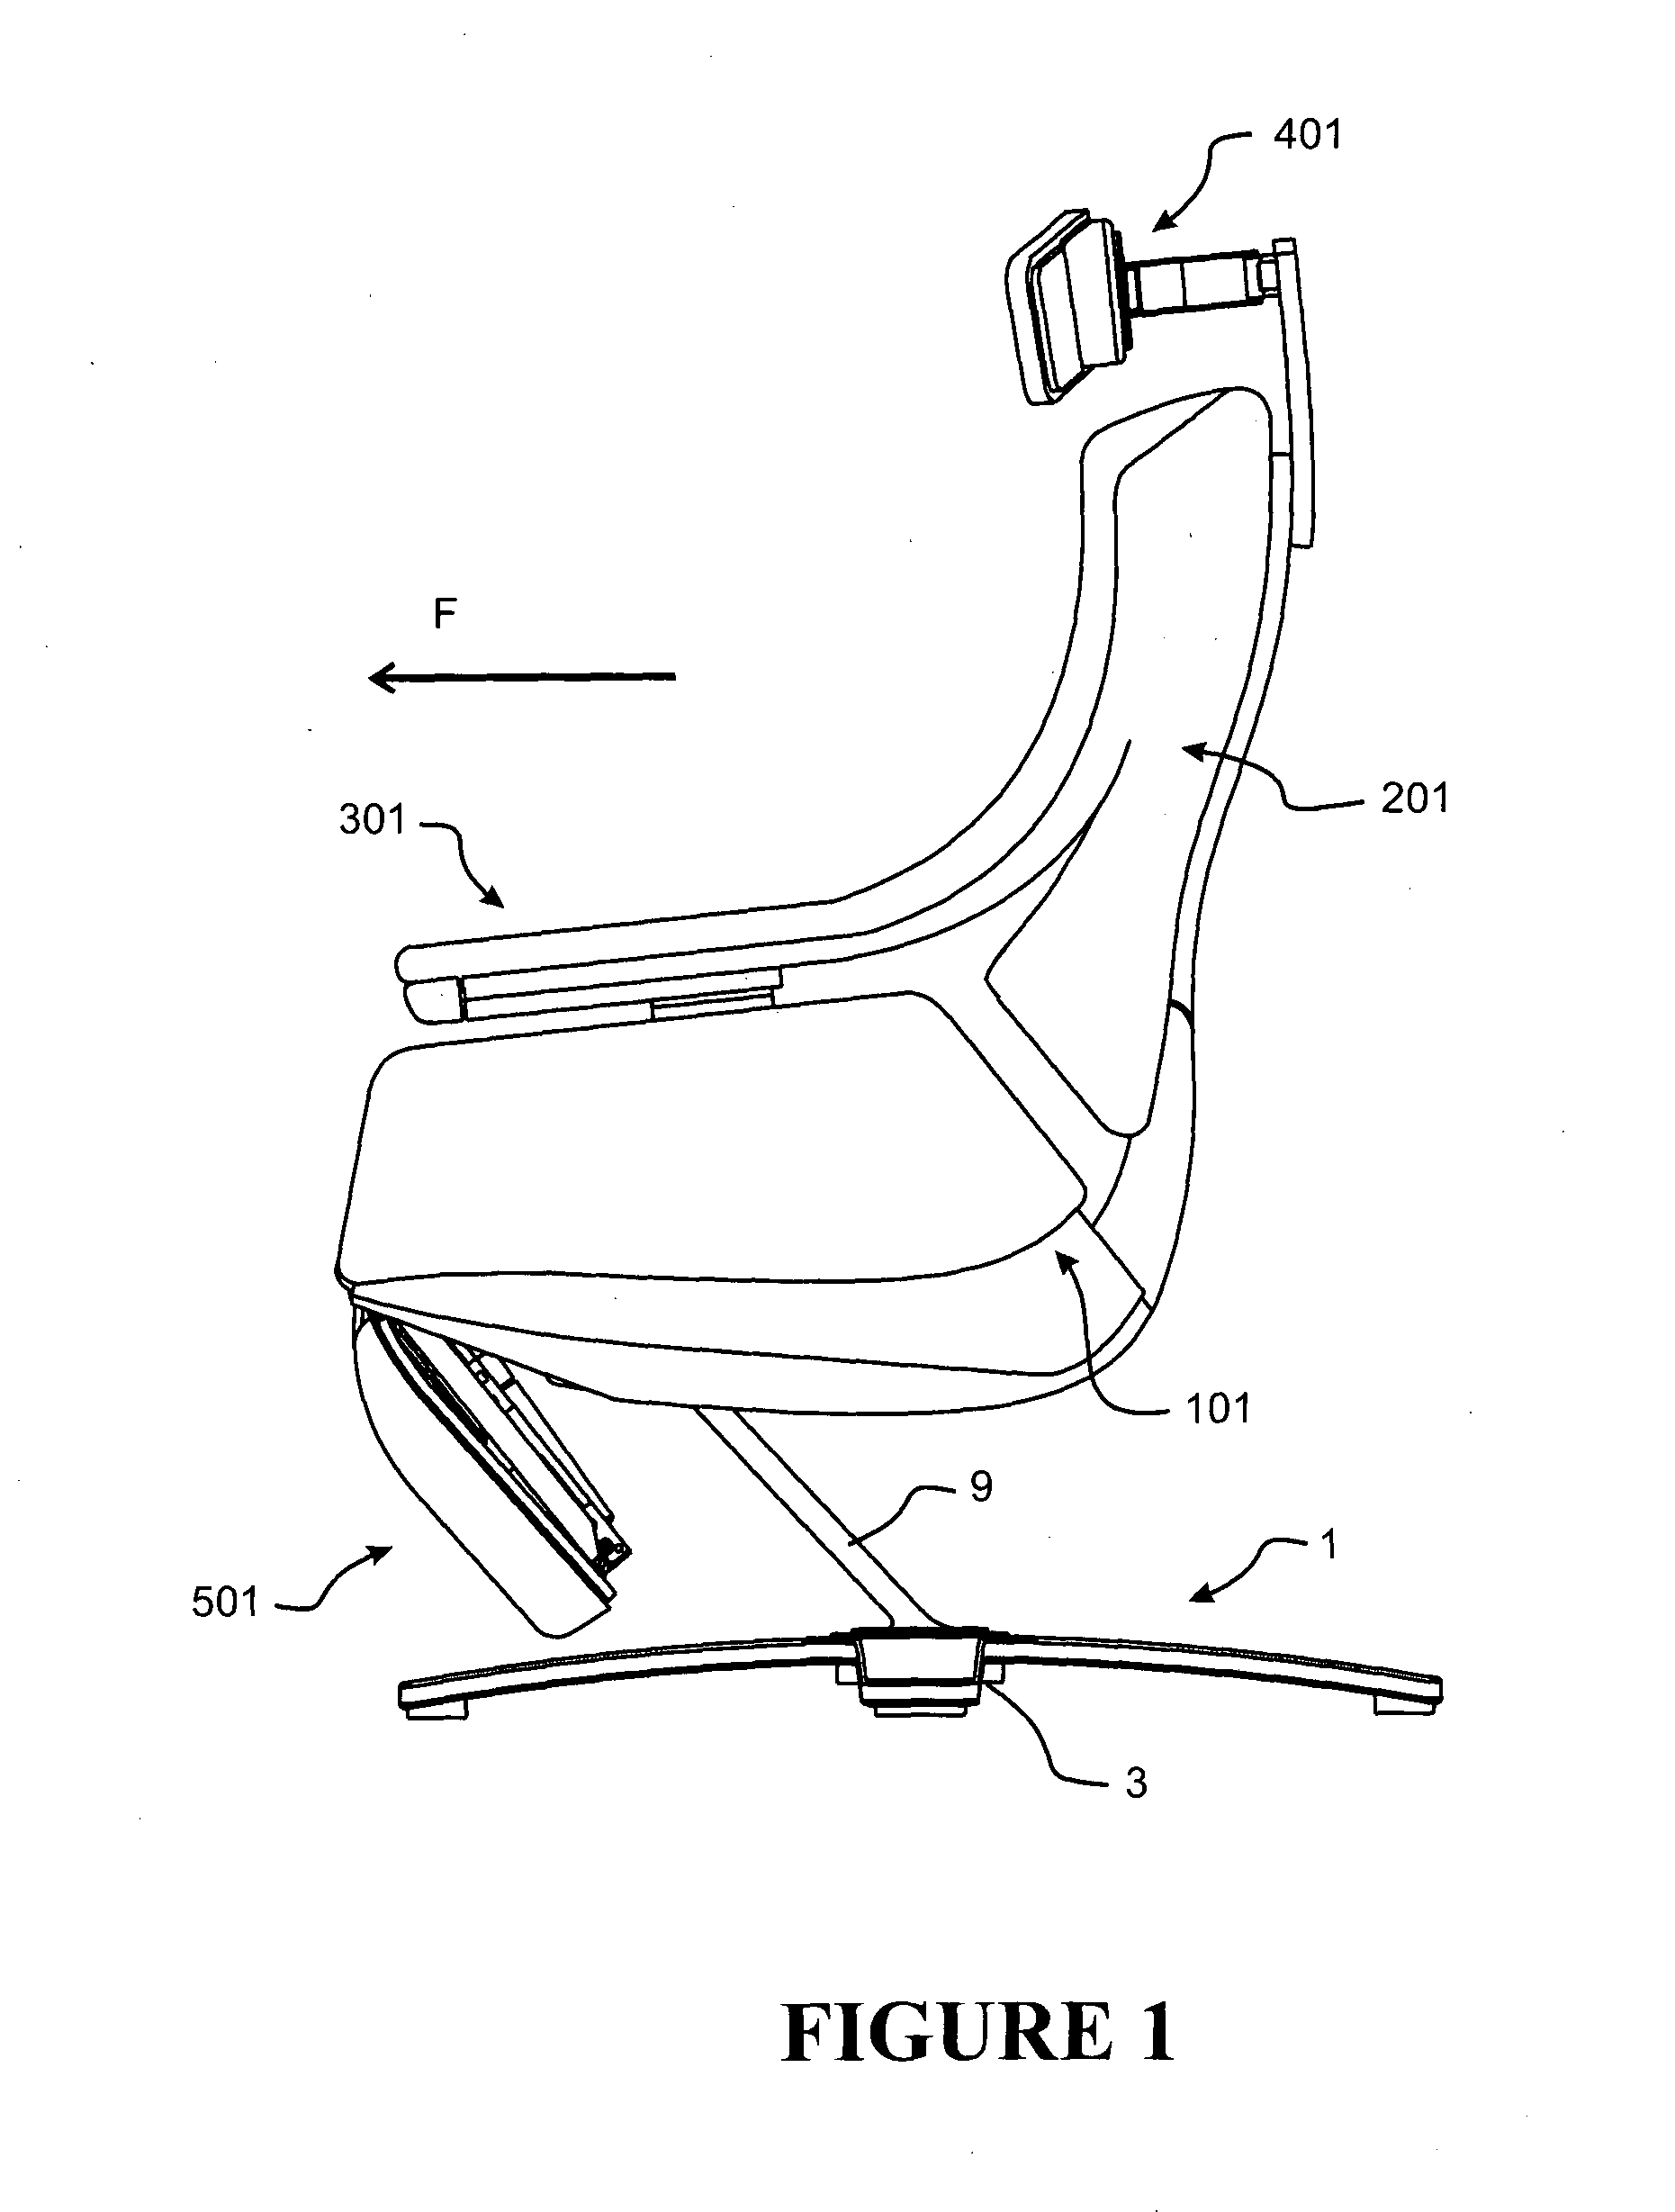 Chair and supports